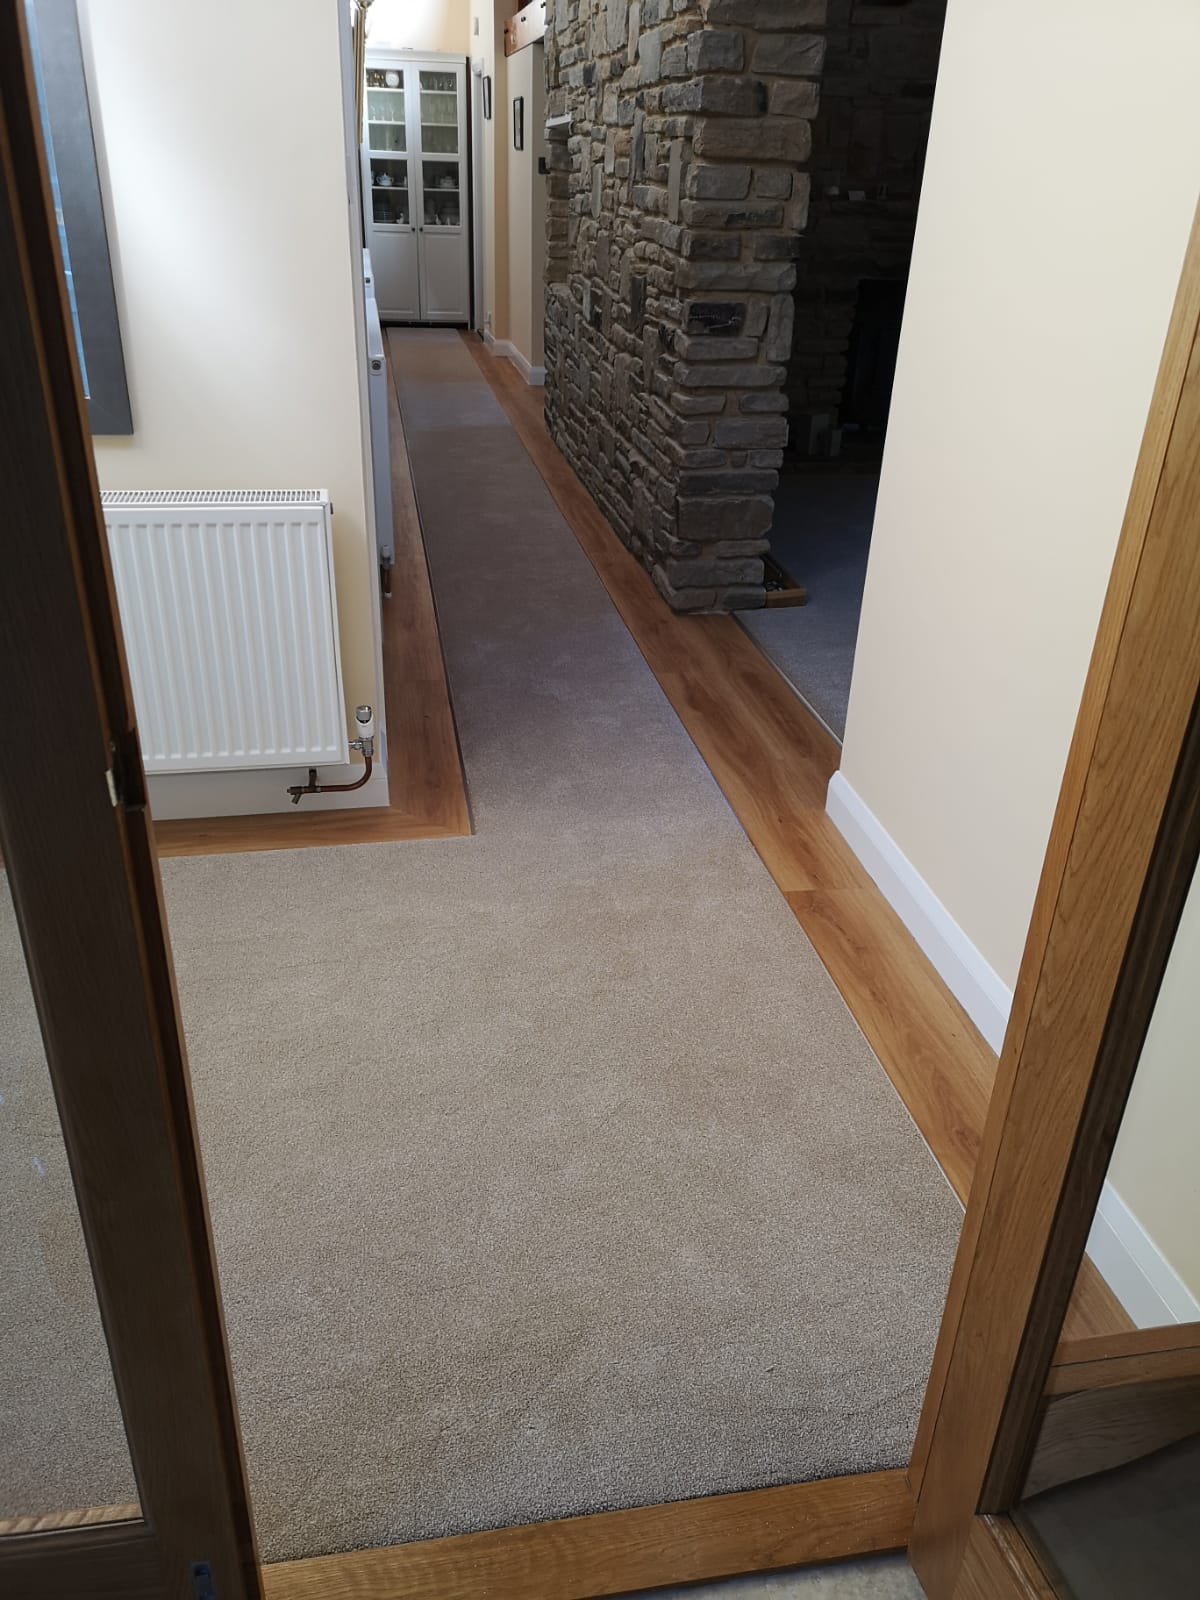 Previous Work from Melvin Head Carpets